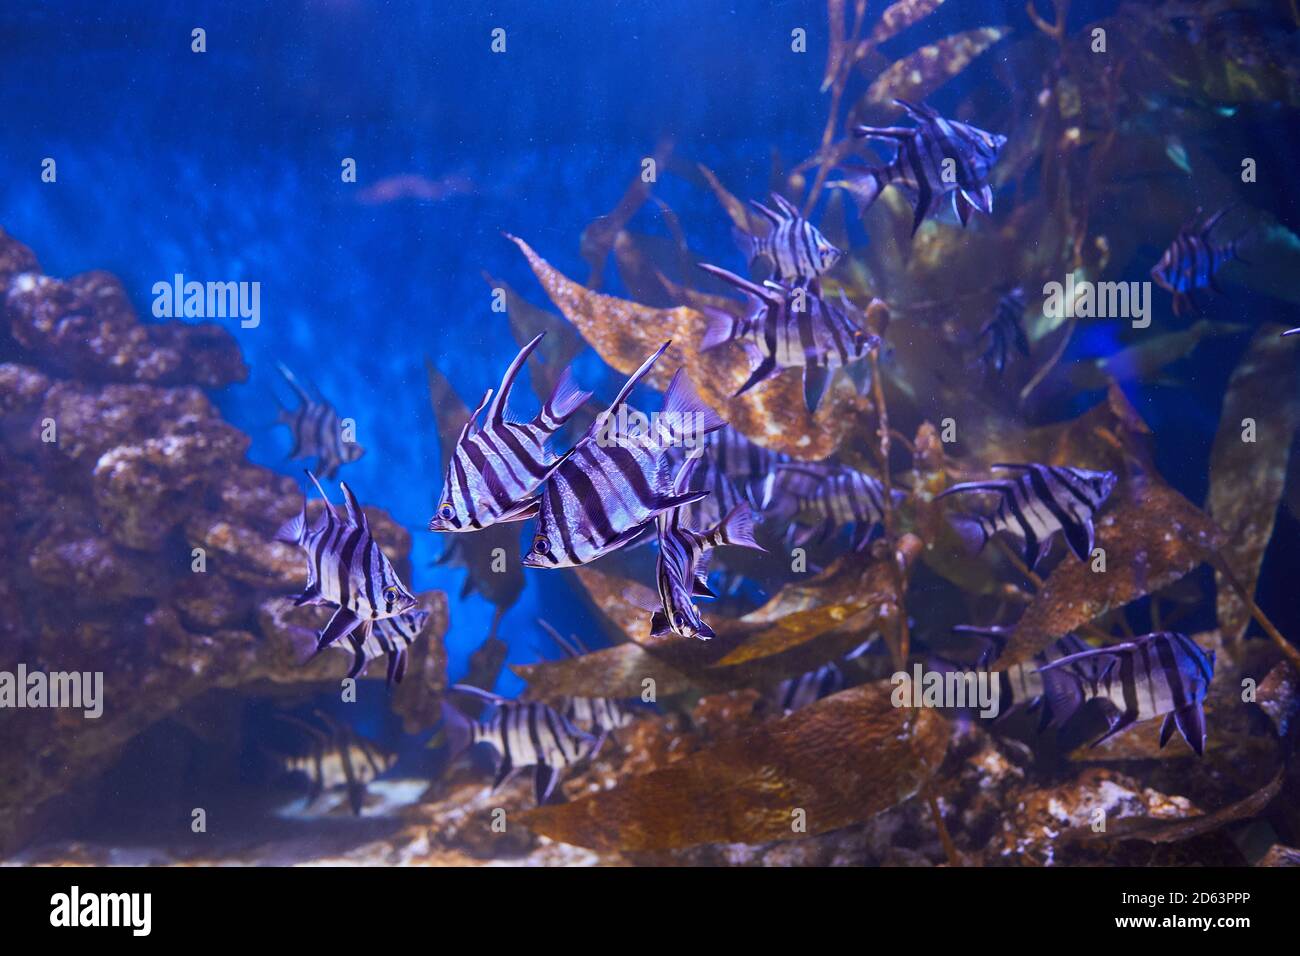 Old Wife (Enoplosus armatus) A black and white striped fish with a small head and long fins on top swimming in aquarium Stock Photo